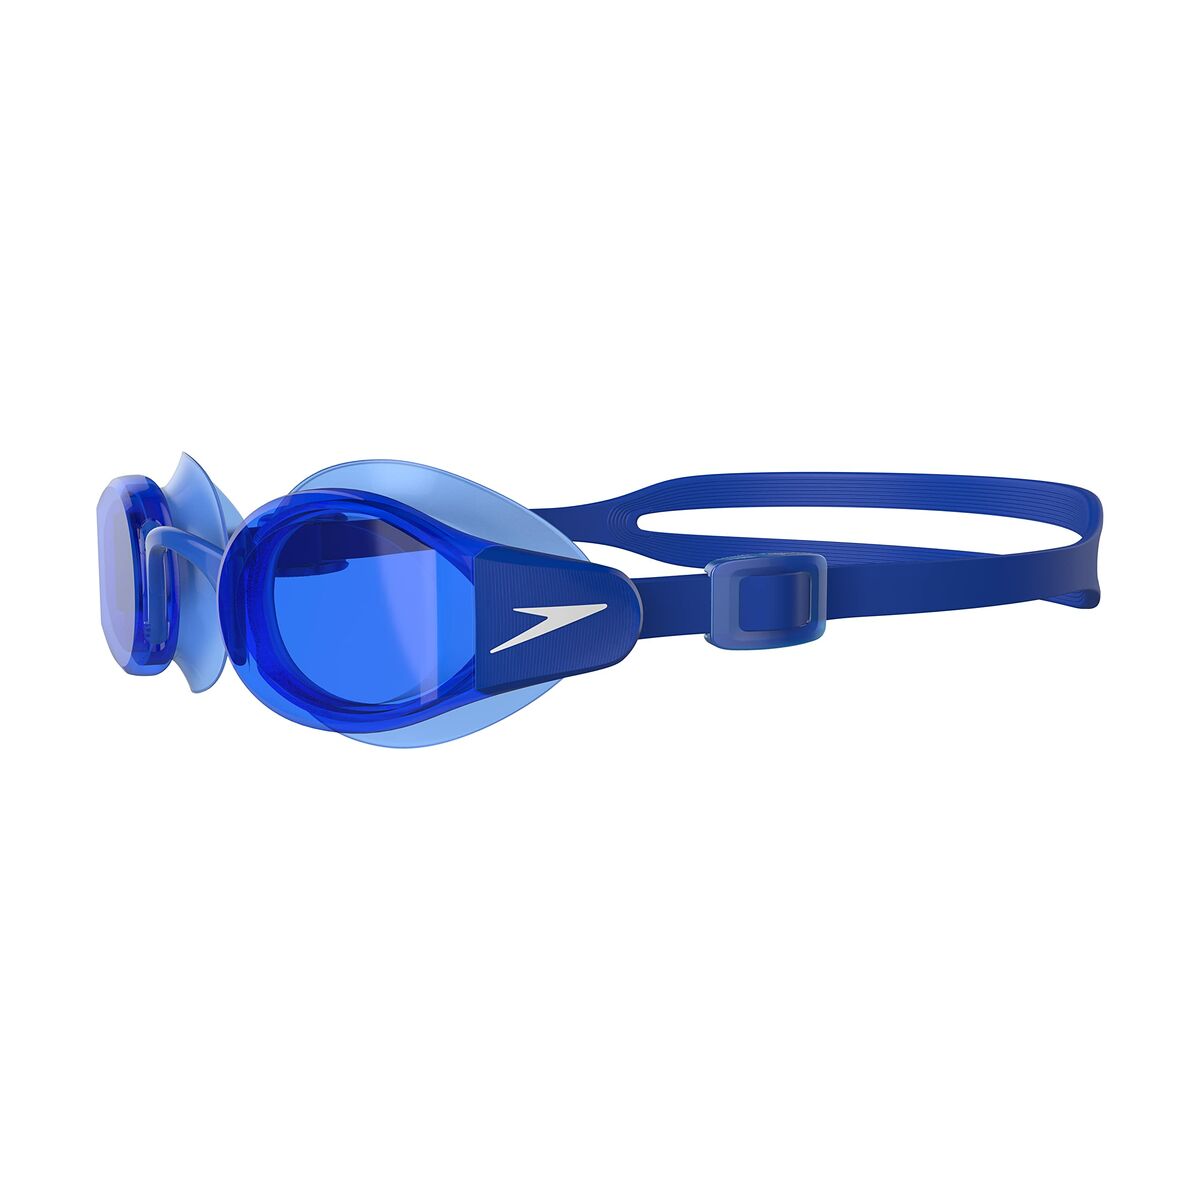 Swimming Goggles Speedo MARINER PRO 8-13534D665 Blue One size